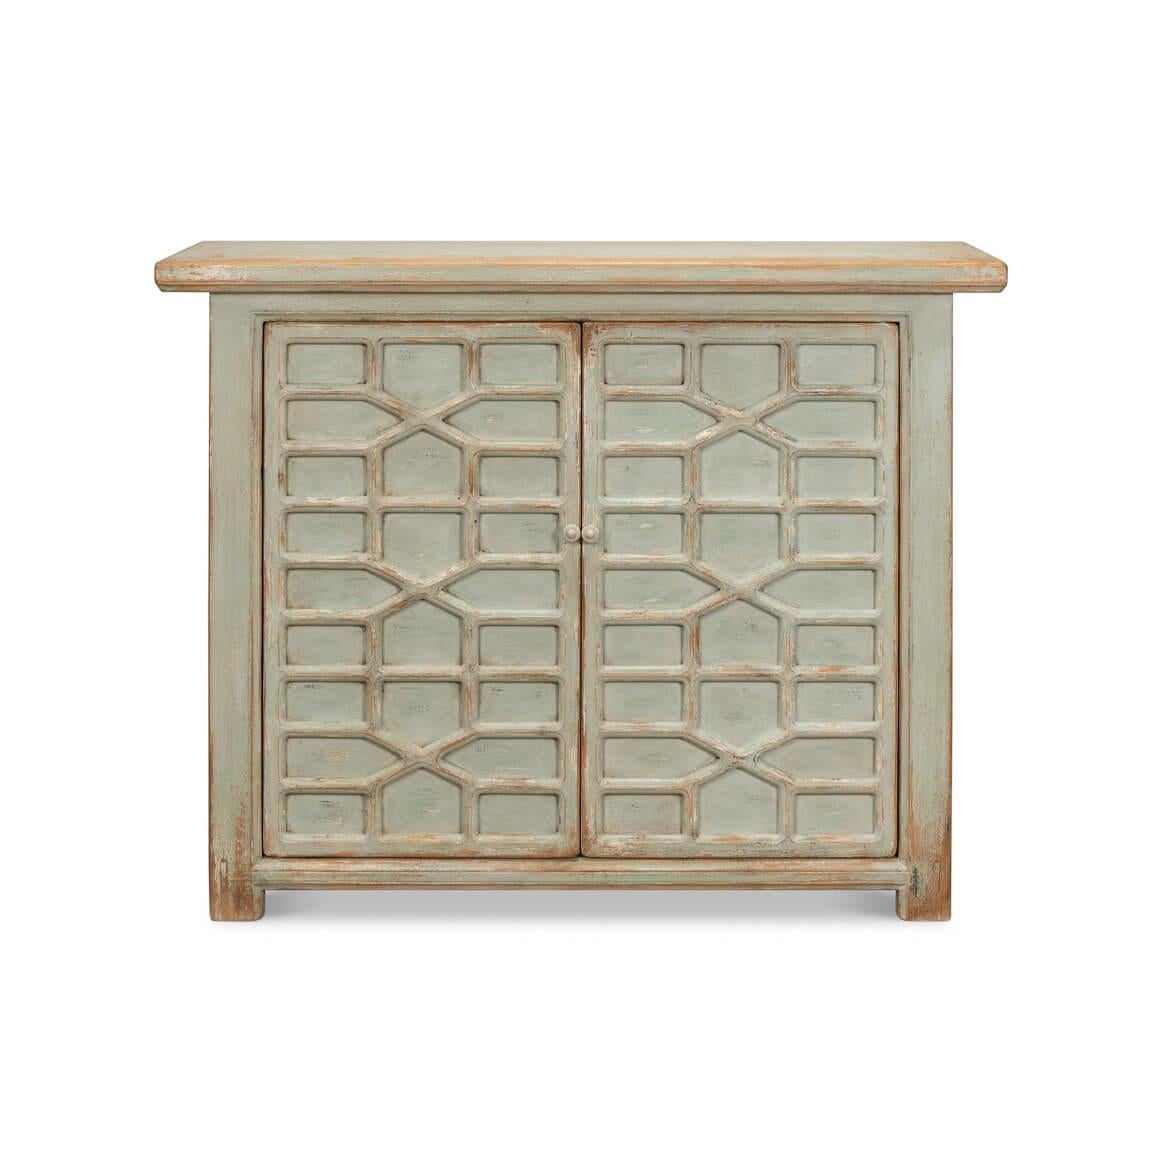 A charming cabinet, beautifully crafted with a distressed painted finish on pine, evoking a lived-in look rich with stories. The blind fretwork door panels feature a lattice pattern reminiscent of old-world craftsmanship.

Behind the two cupboard